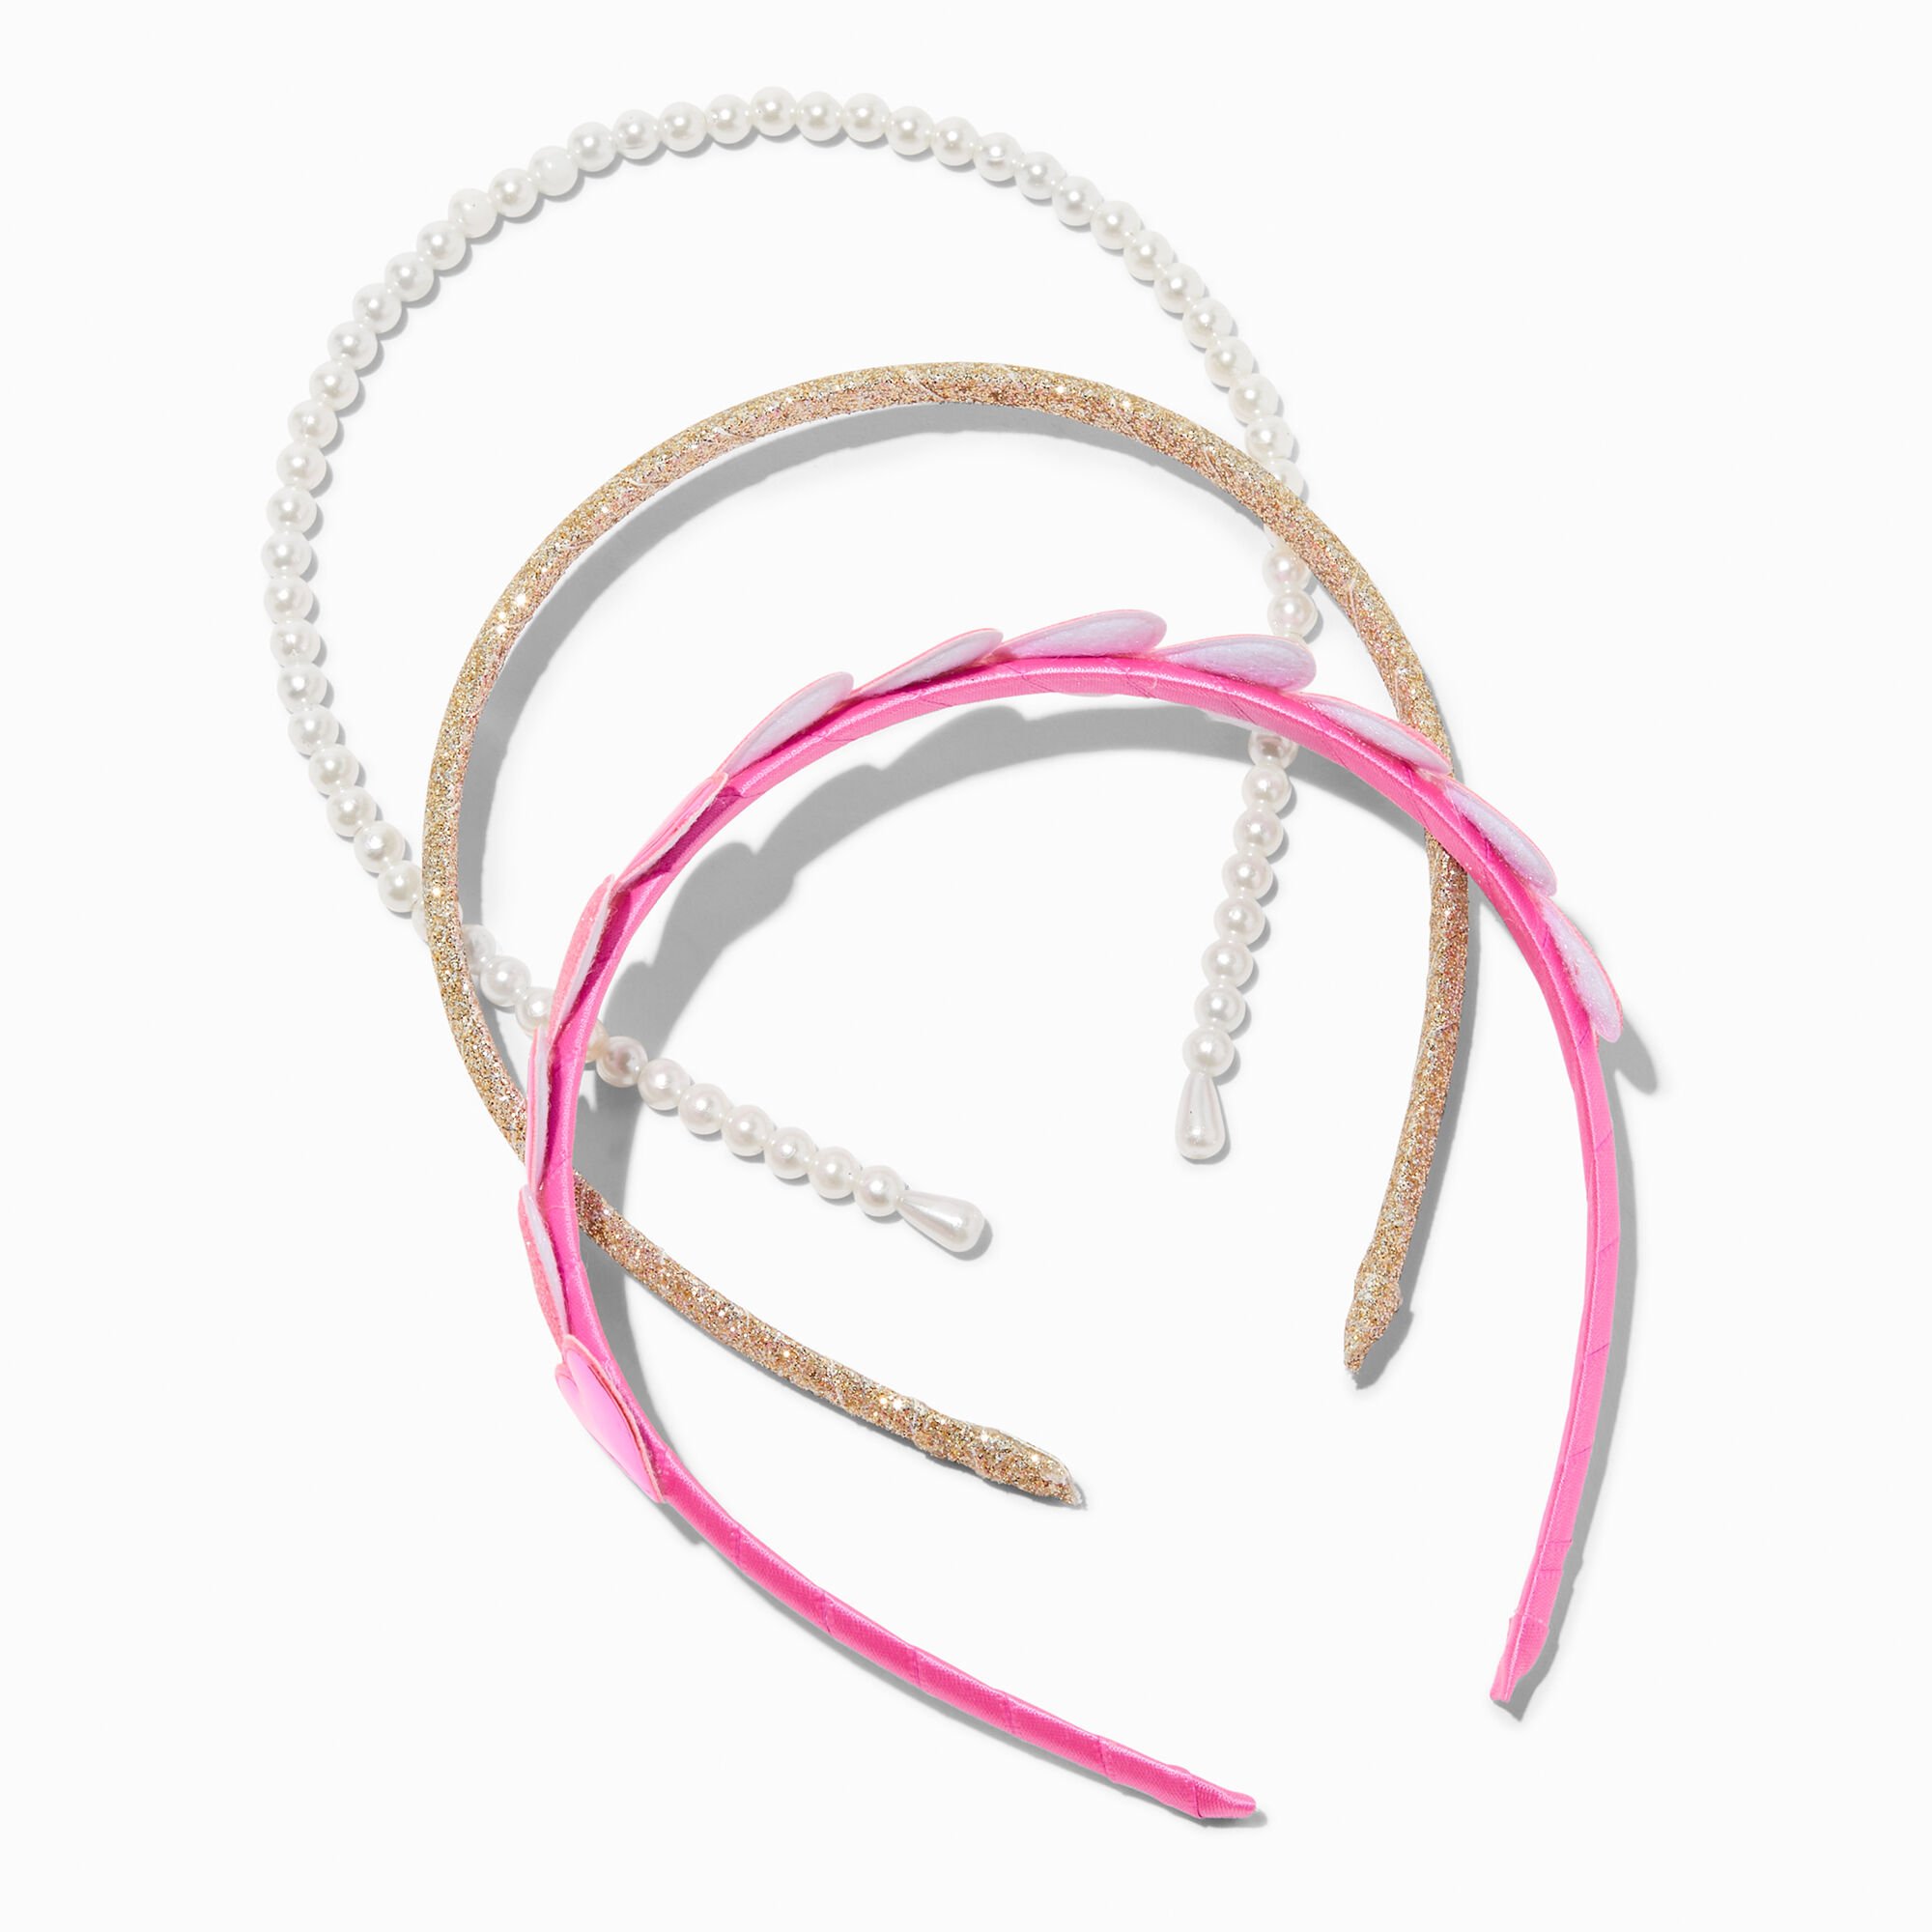 View Claires Club Heart Pearl Headbands 3 Pack Pink information